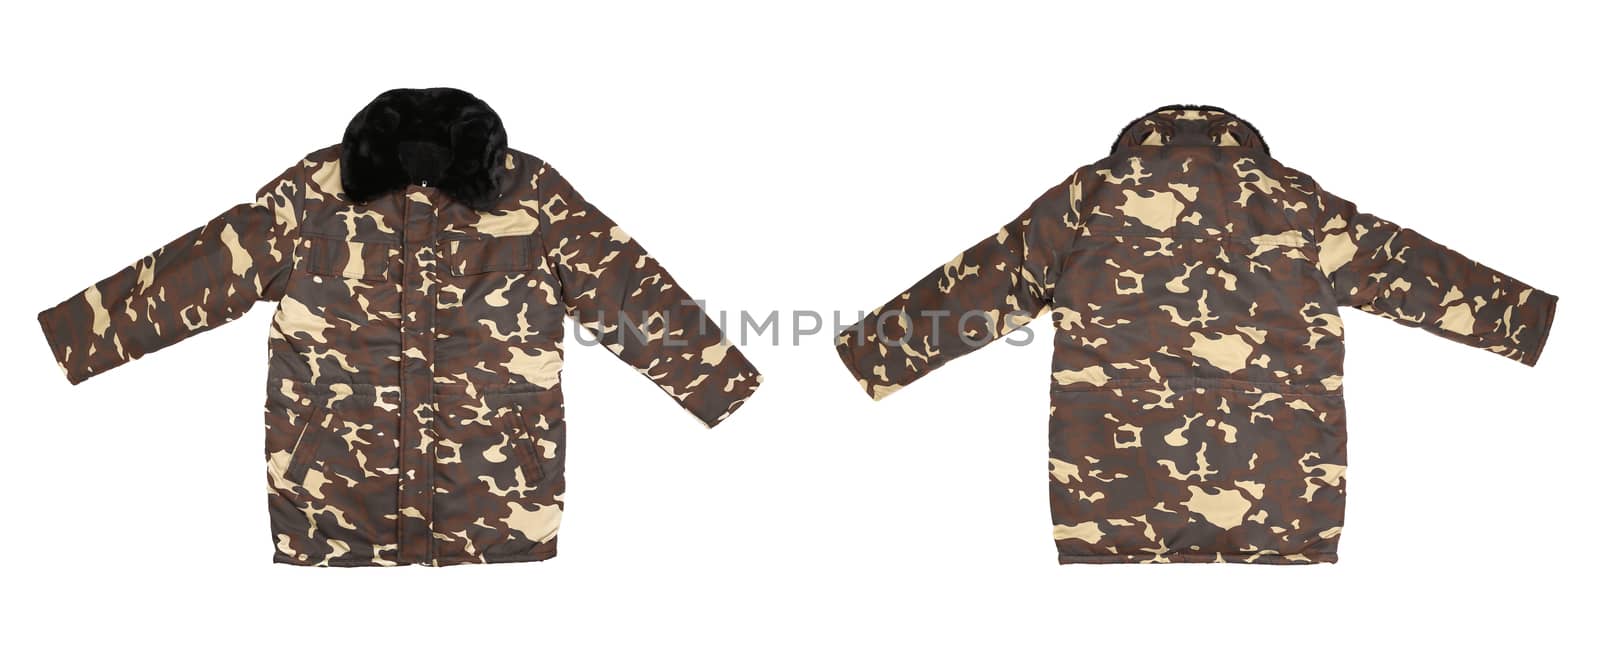 Camouflage winter jacket with black collar. by indigolotos